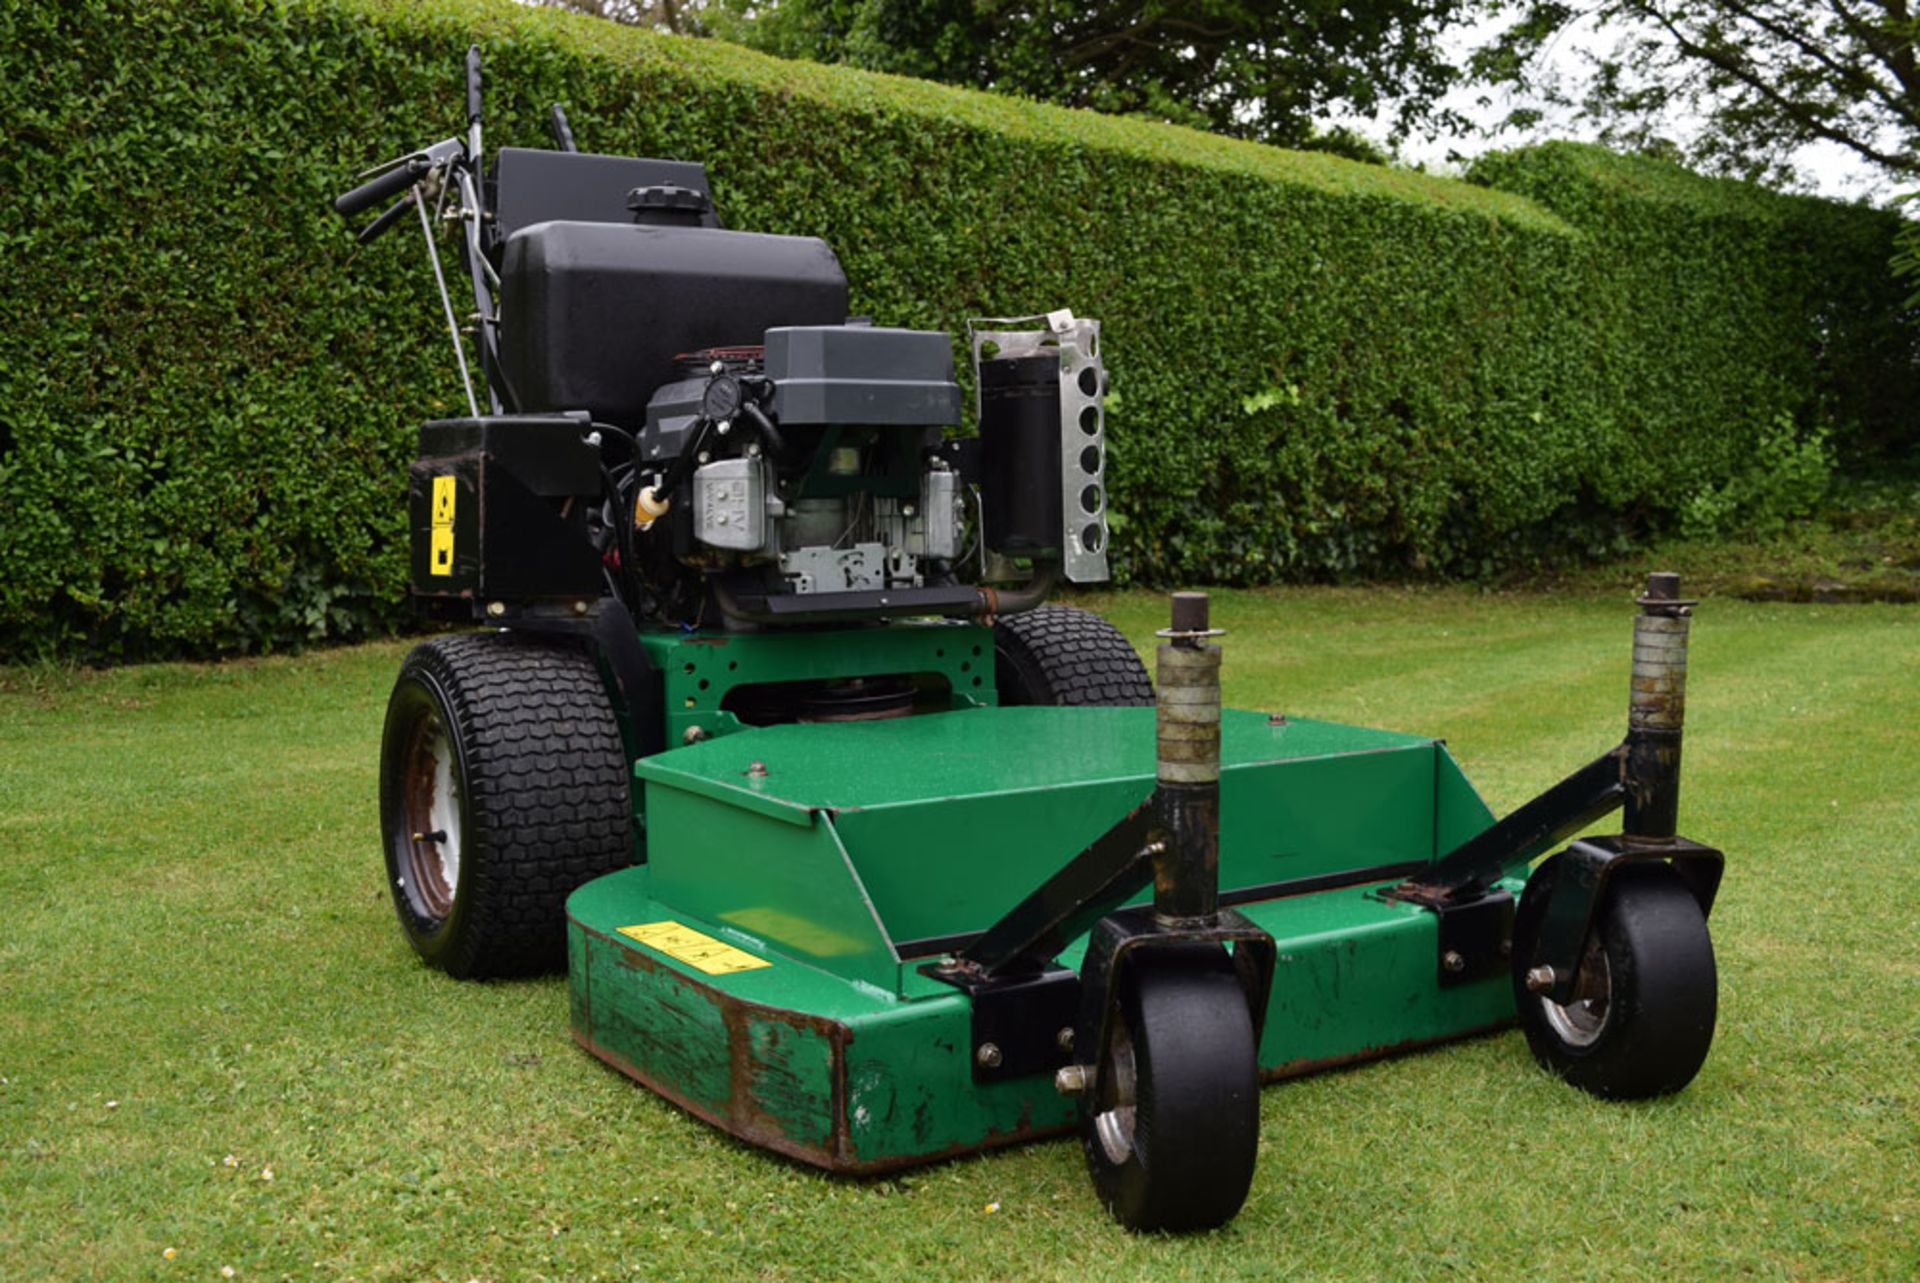 2008 Ransomes Pedestrian 36"""""""" Commercial Walk Behind Zero Turn Rotary Mower - Image 3 of 3